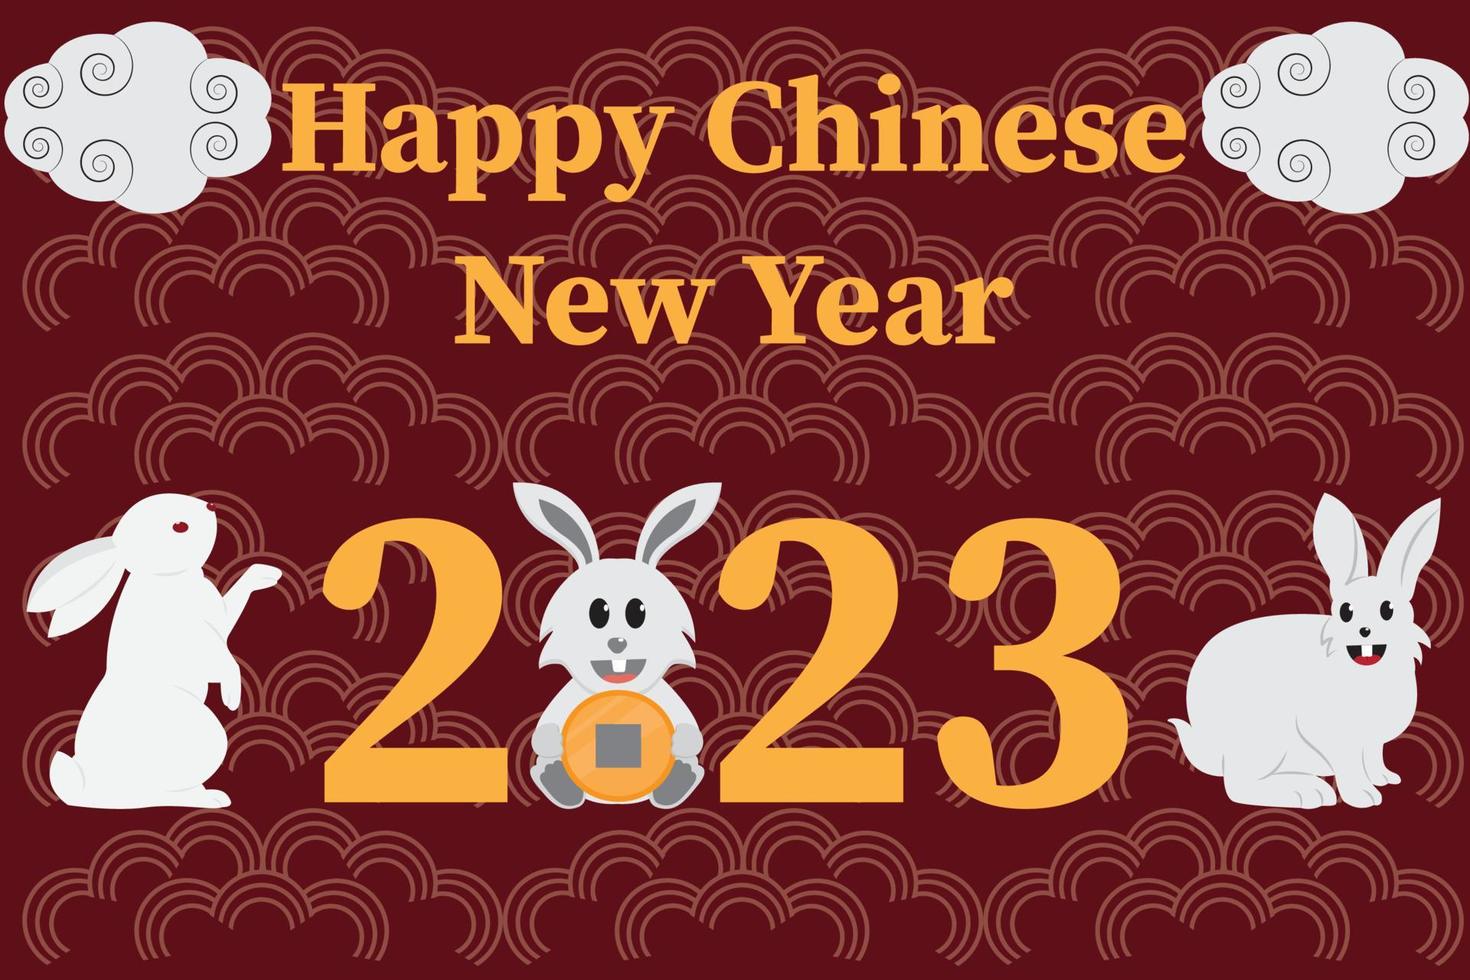 2023 year of the rabbit chinese new year celebration background vector